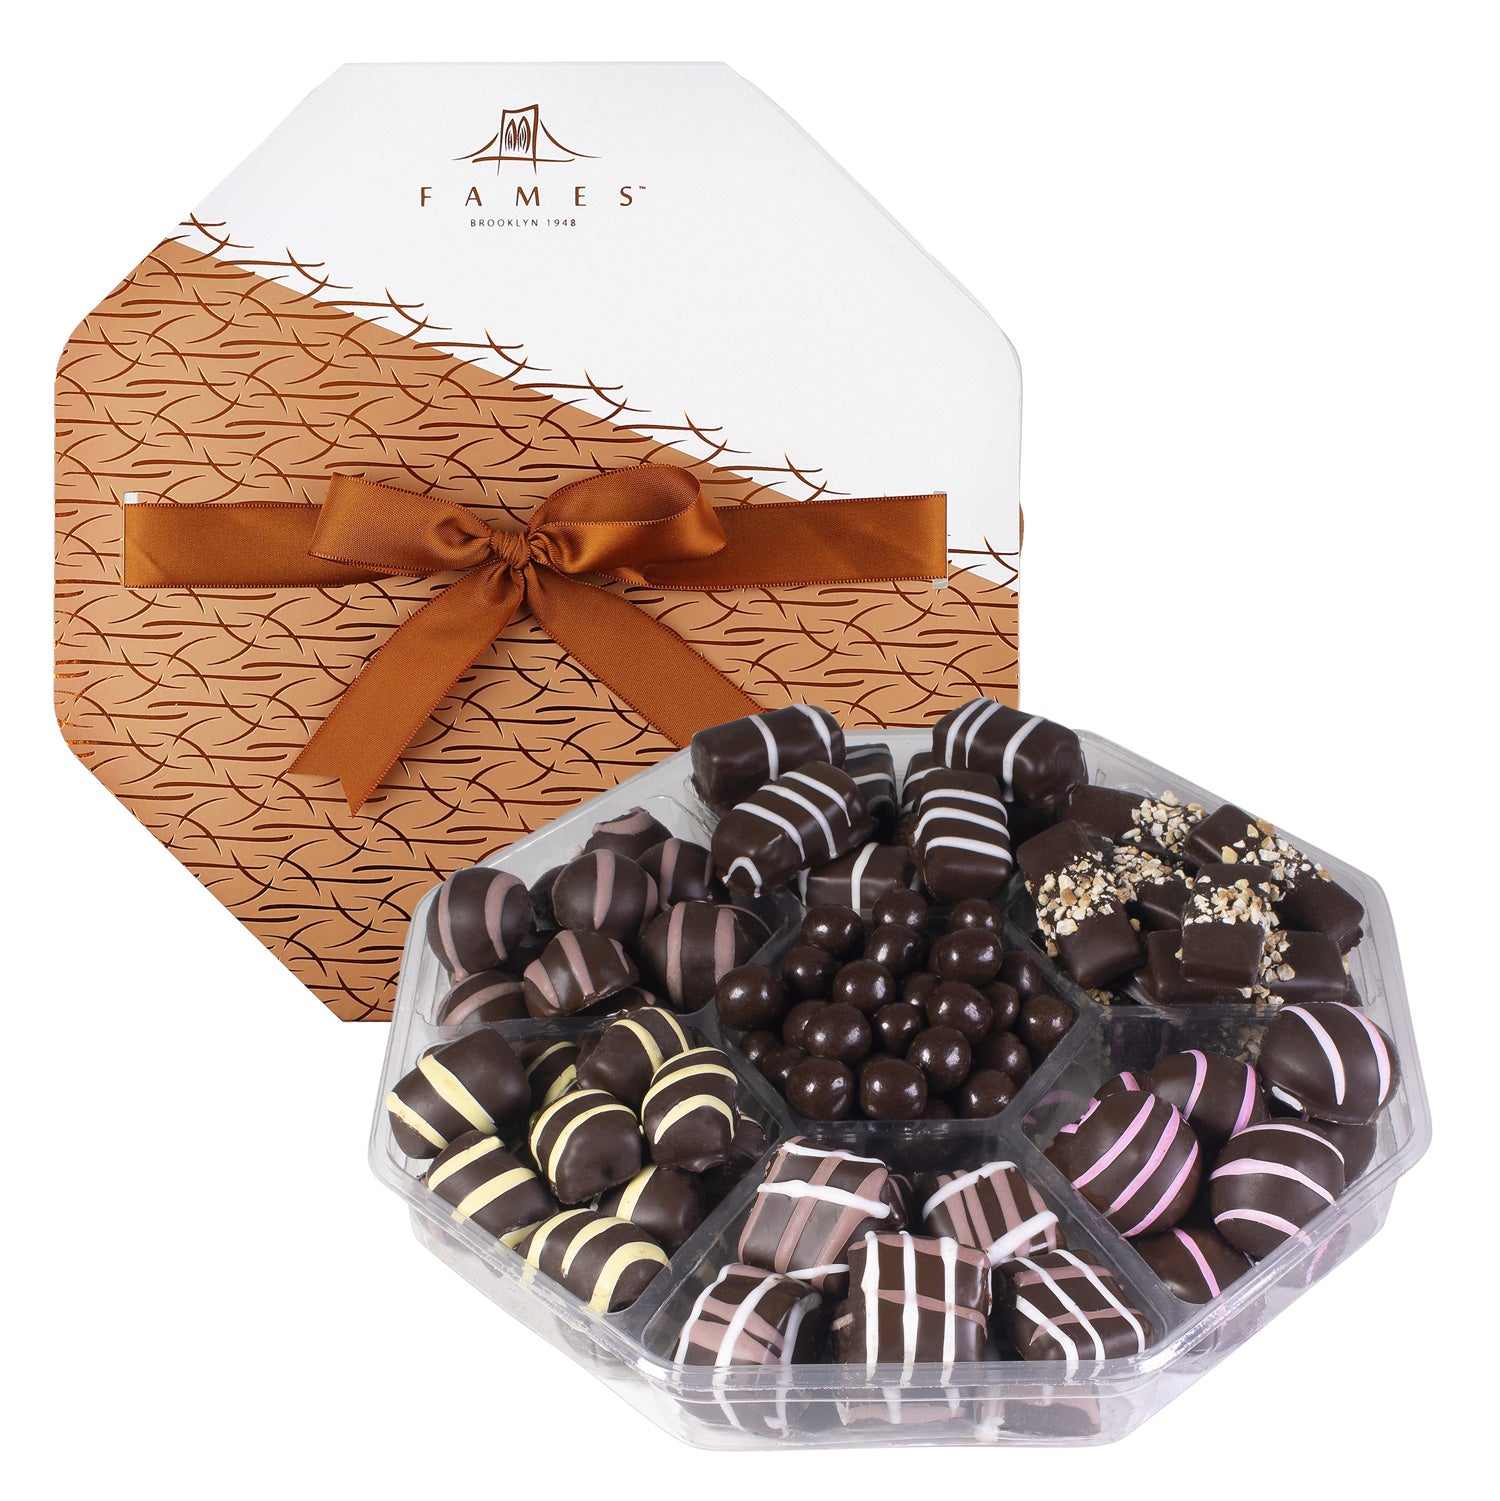 Artisan Crafted Chocolate Gift Assortment